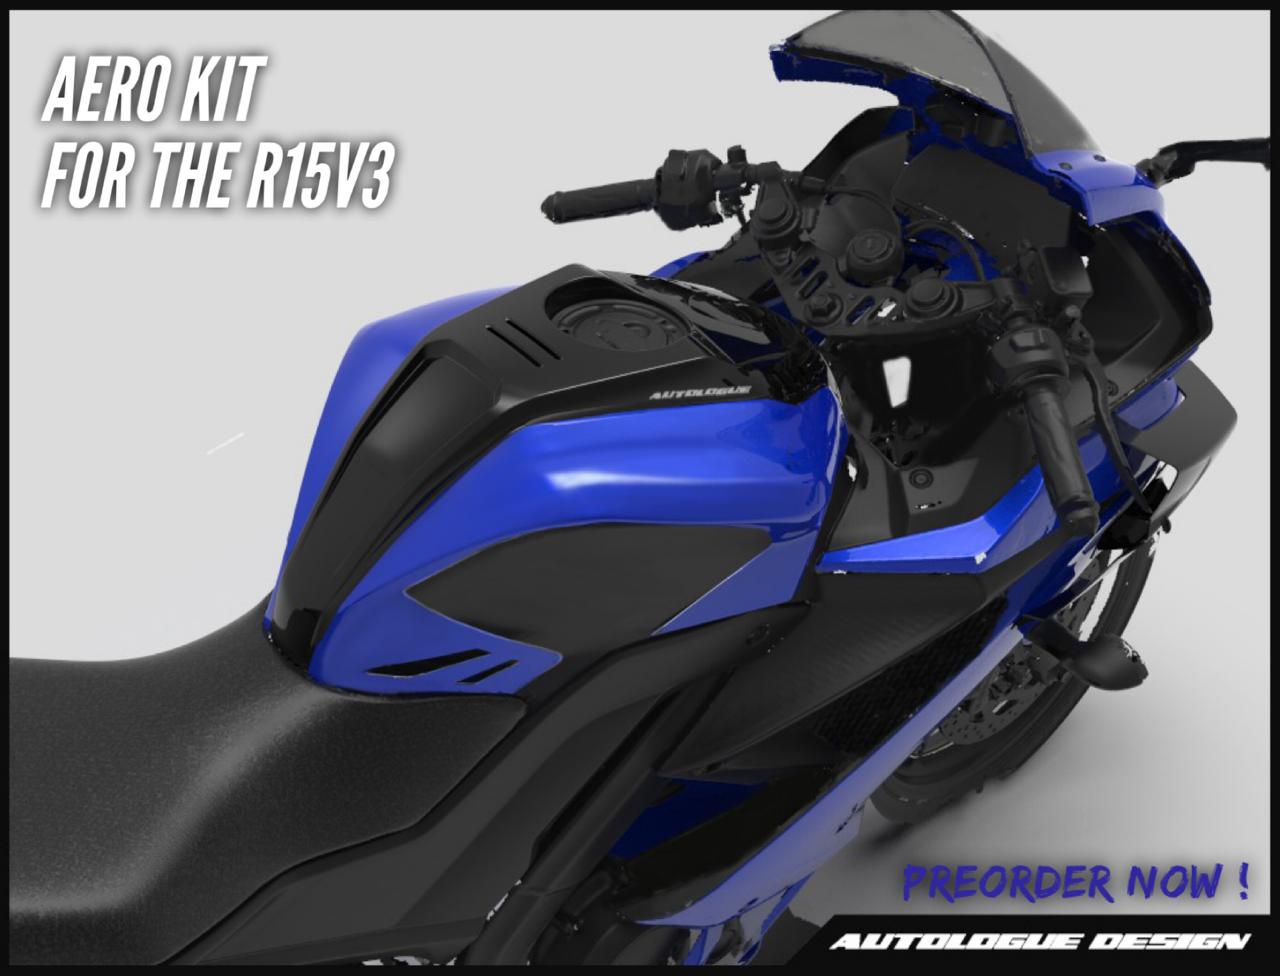 Yamaha R15 V3 Aftermarket Modification Aero Kit Launched By Autologue Design